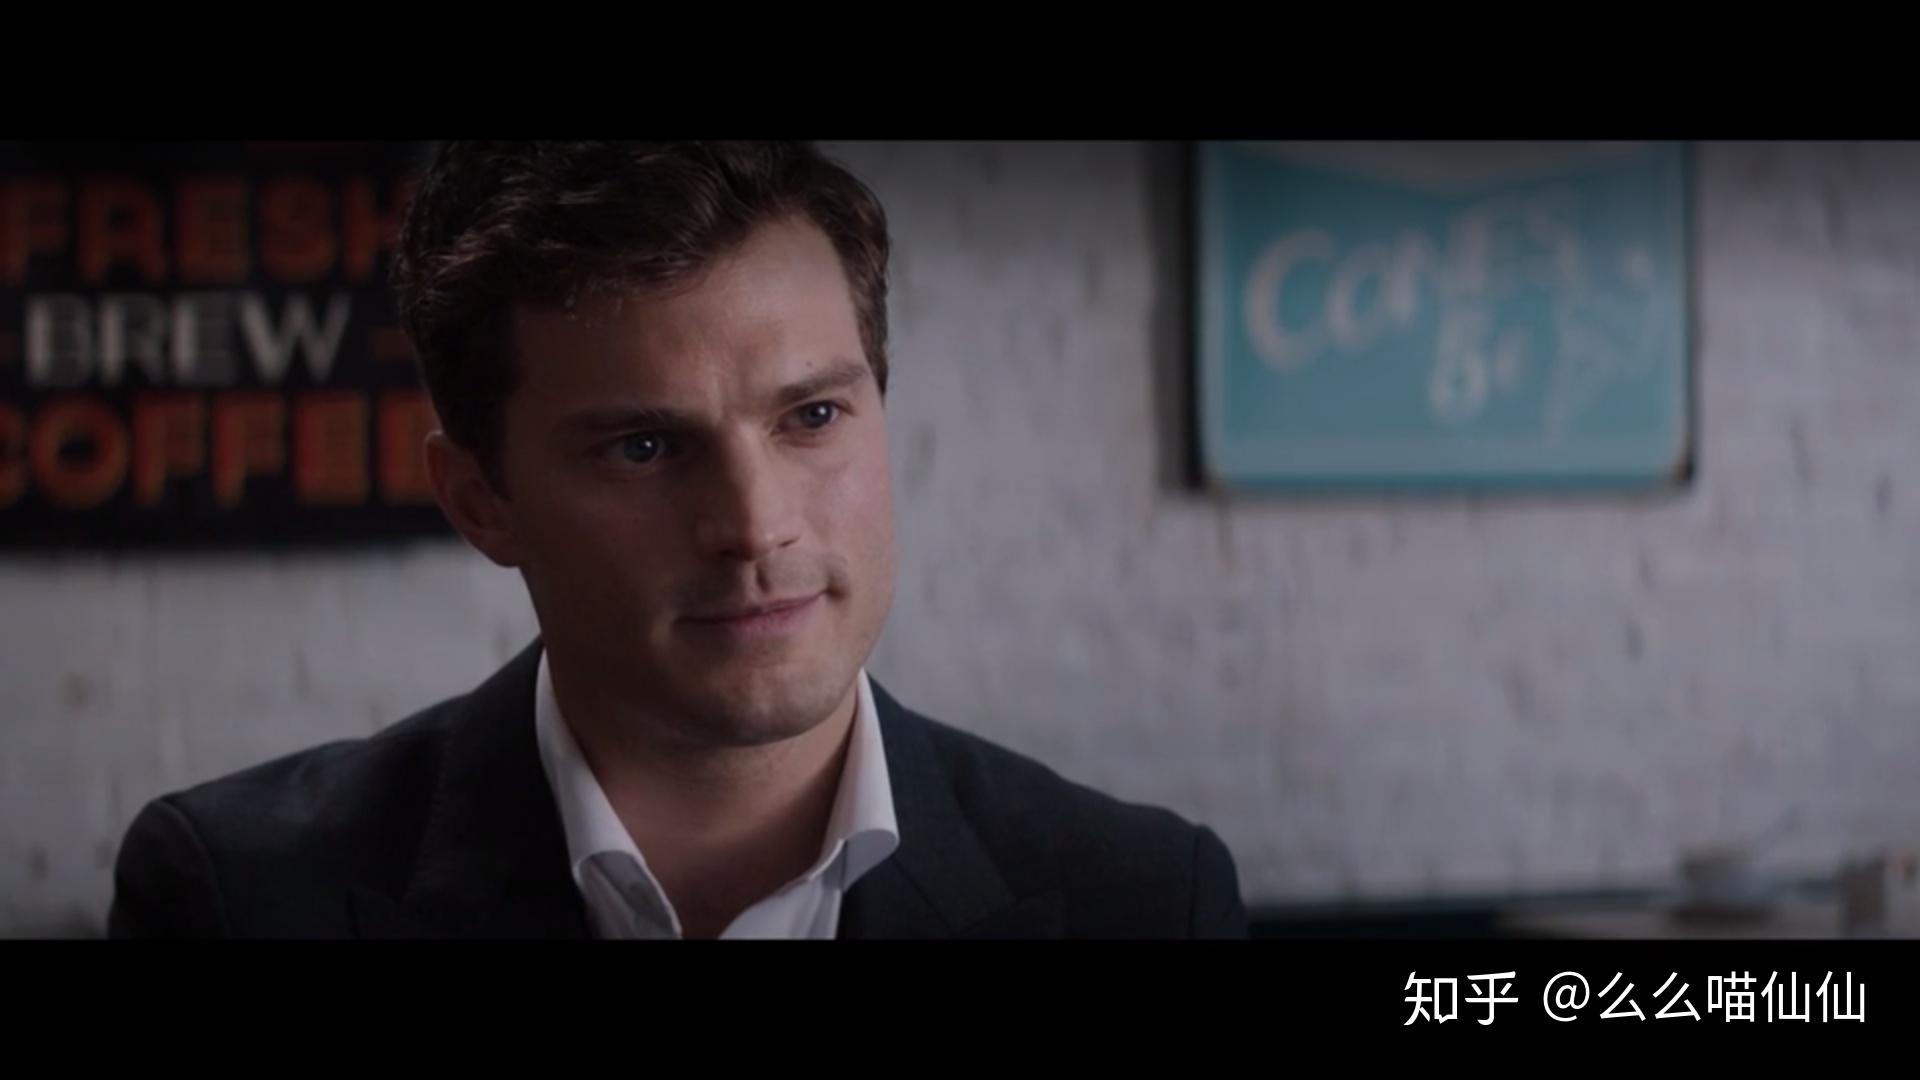 Fifty Shades Darker Date Night Clip & New Posters | Movies